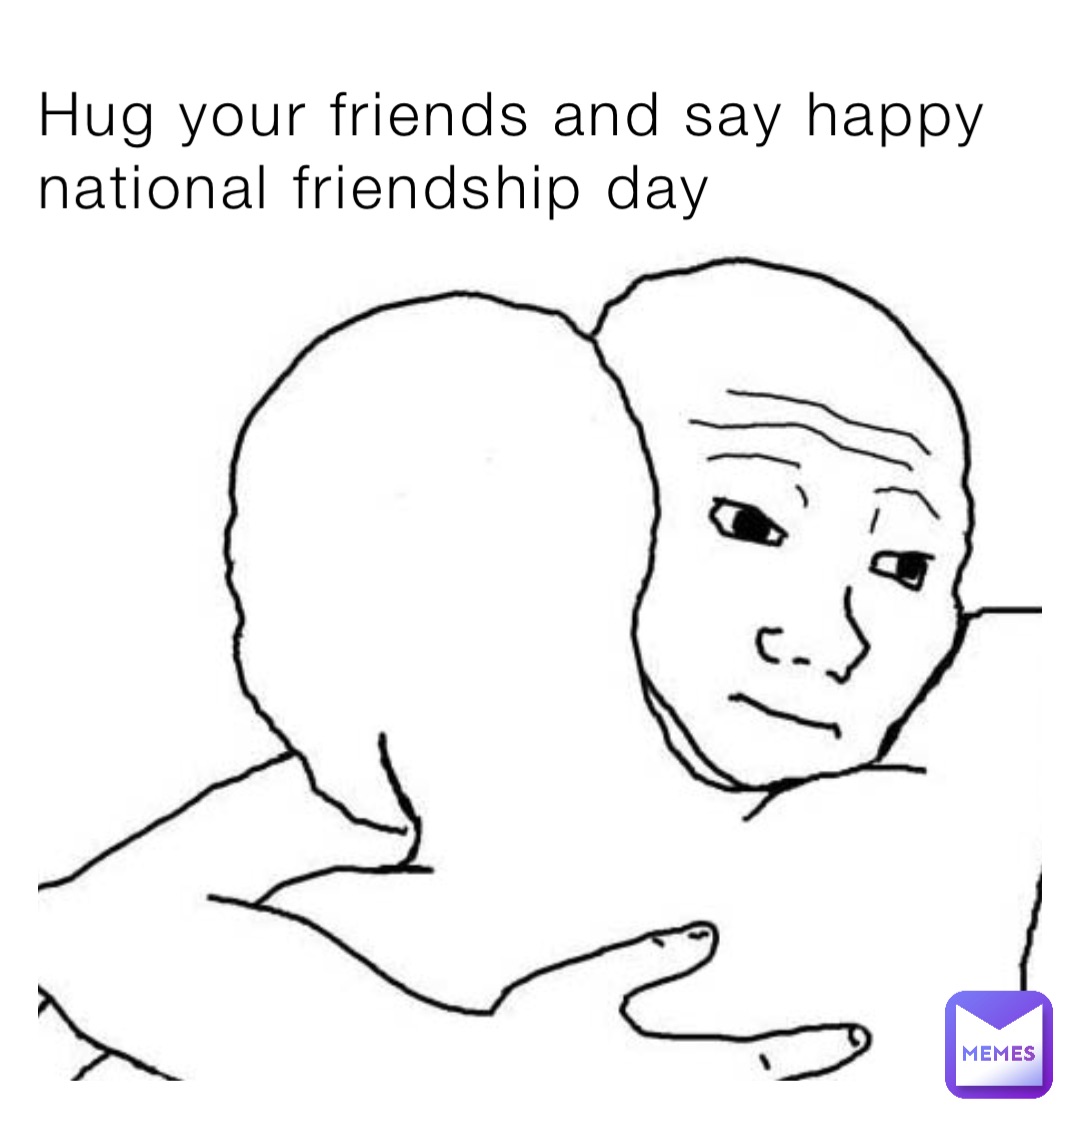 Hug your friends and say happy national friendship day